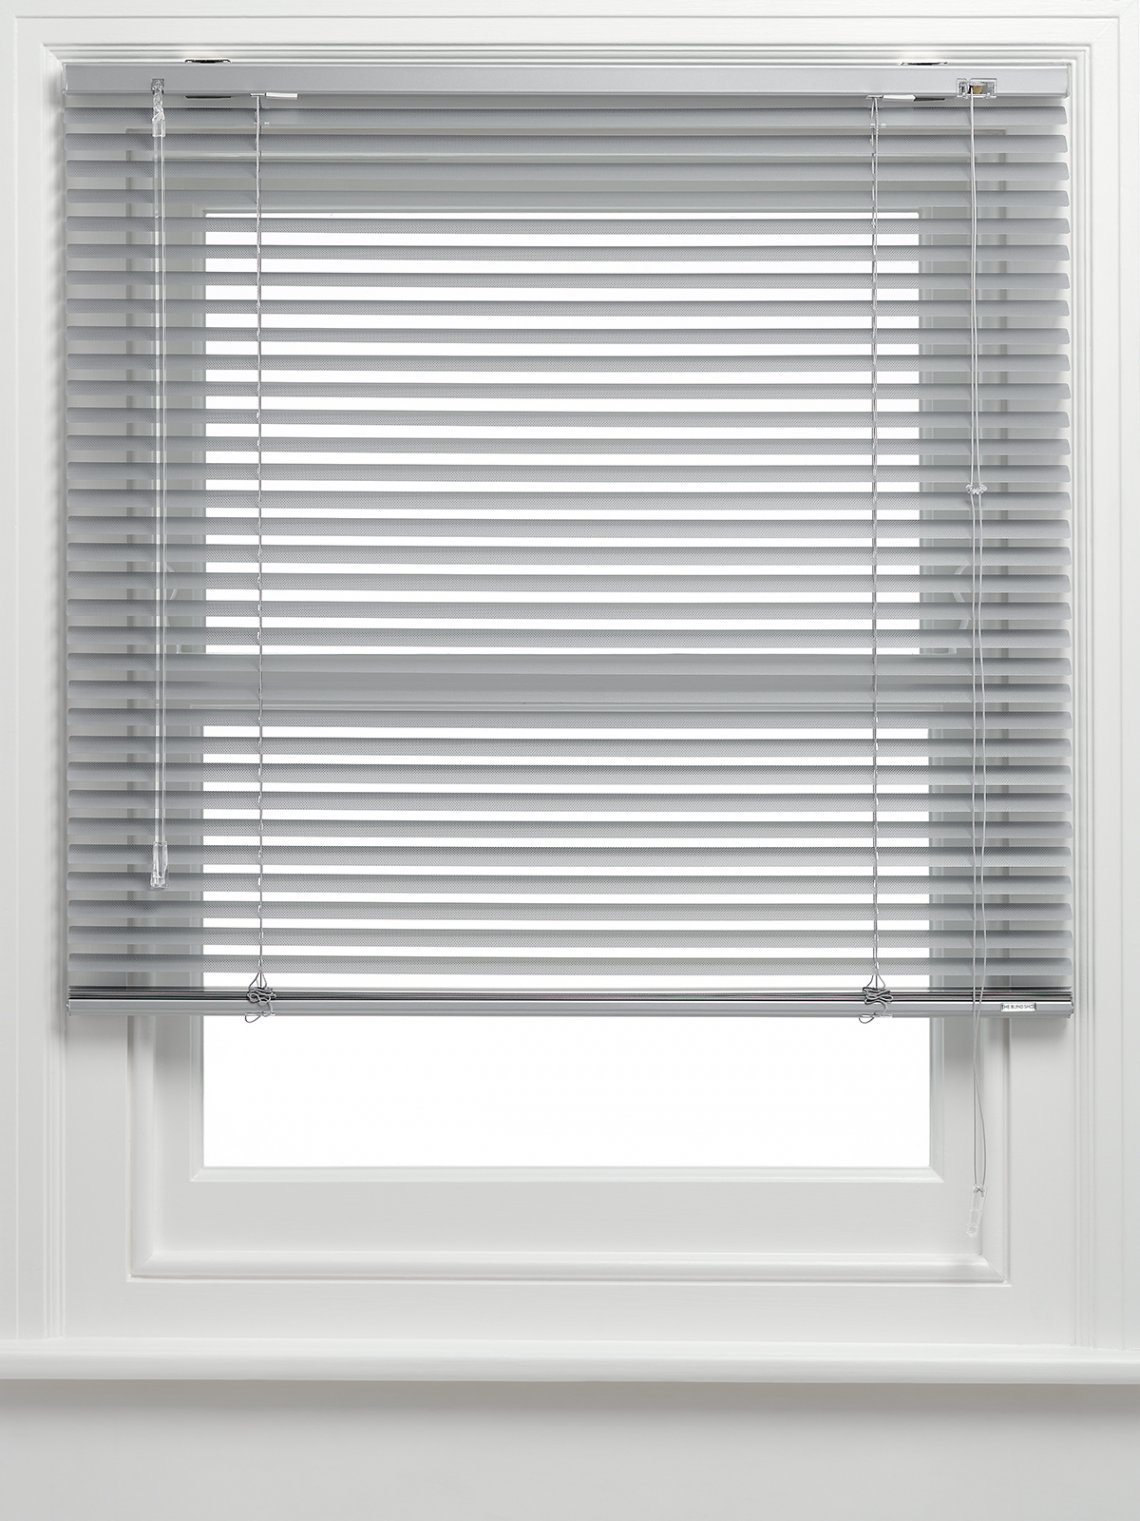 Aluminium Metal Venetian Blinds - Perforated Finishes - The Blind Shop